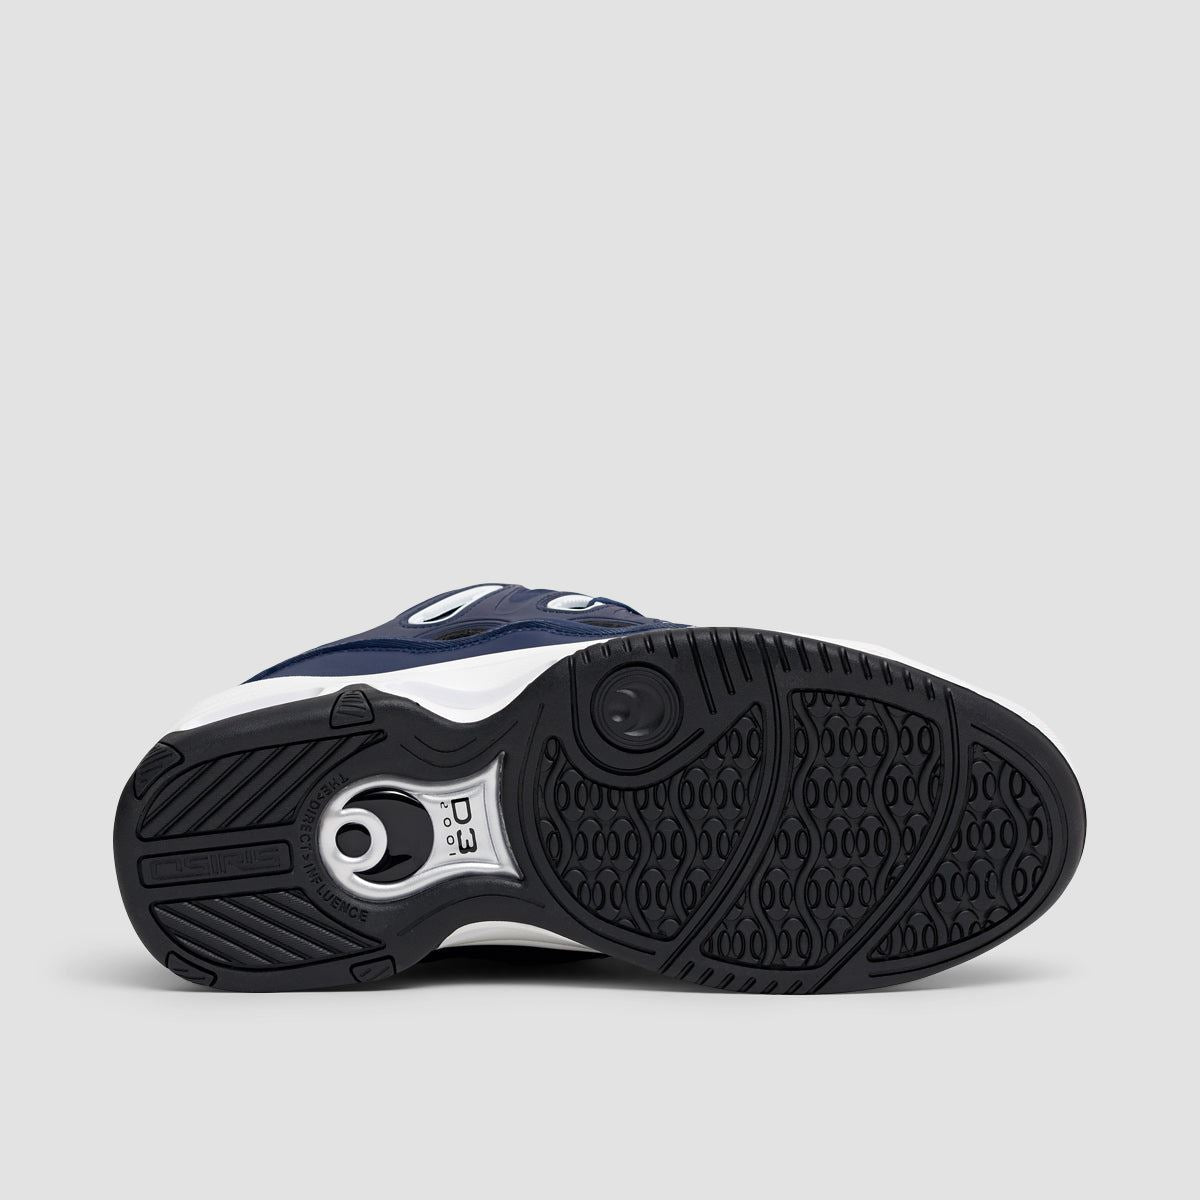 Osiris D3 2001 Shoes - Navy/Red/Paisley